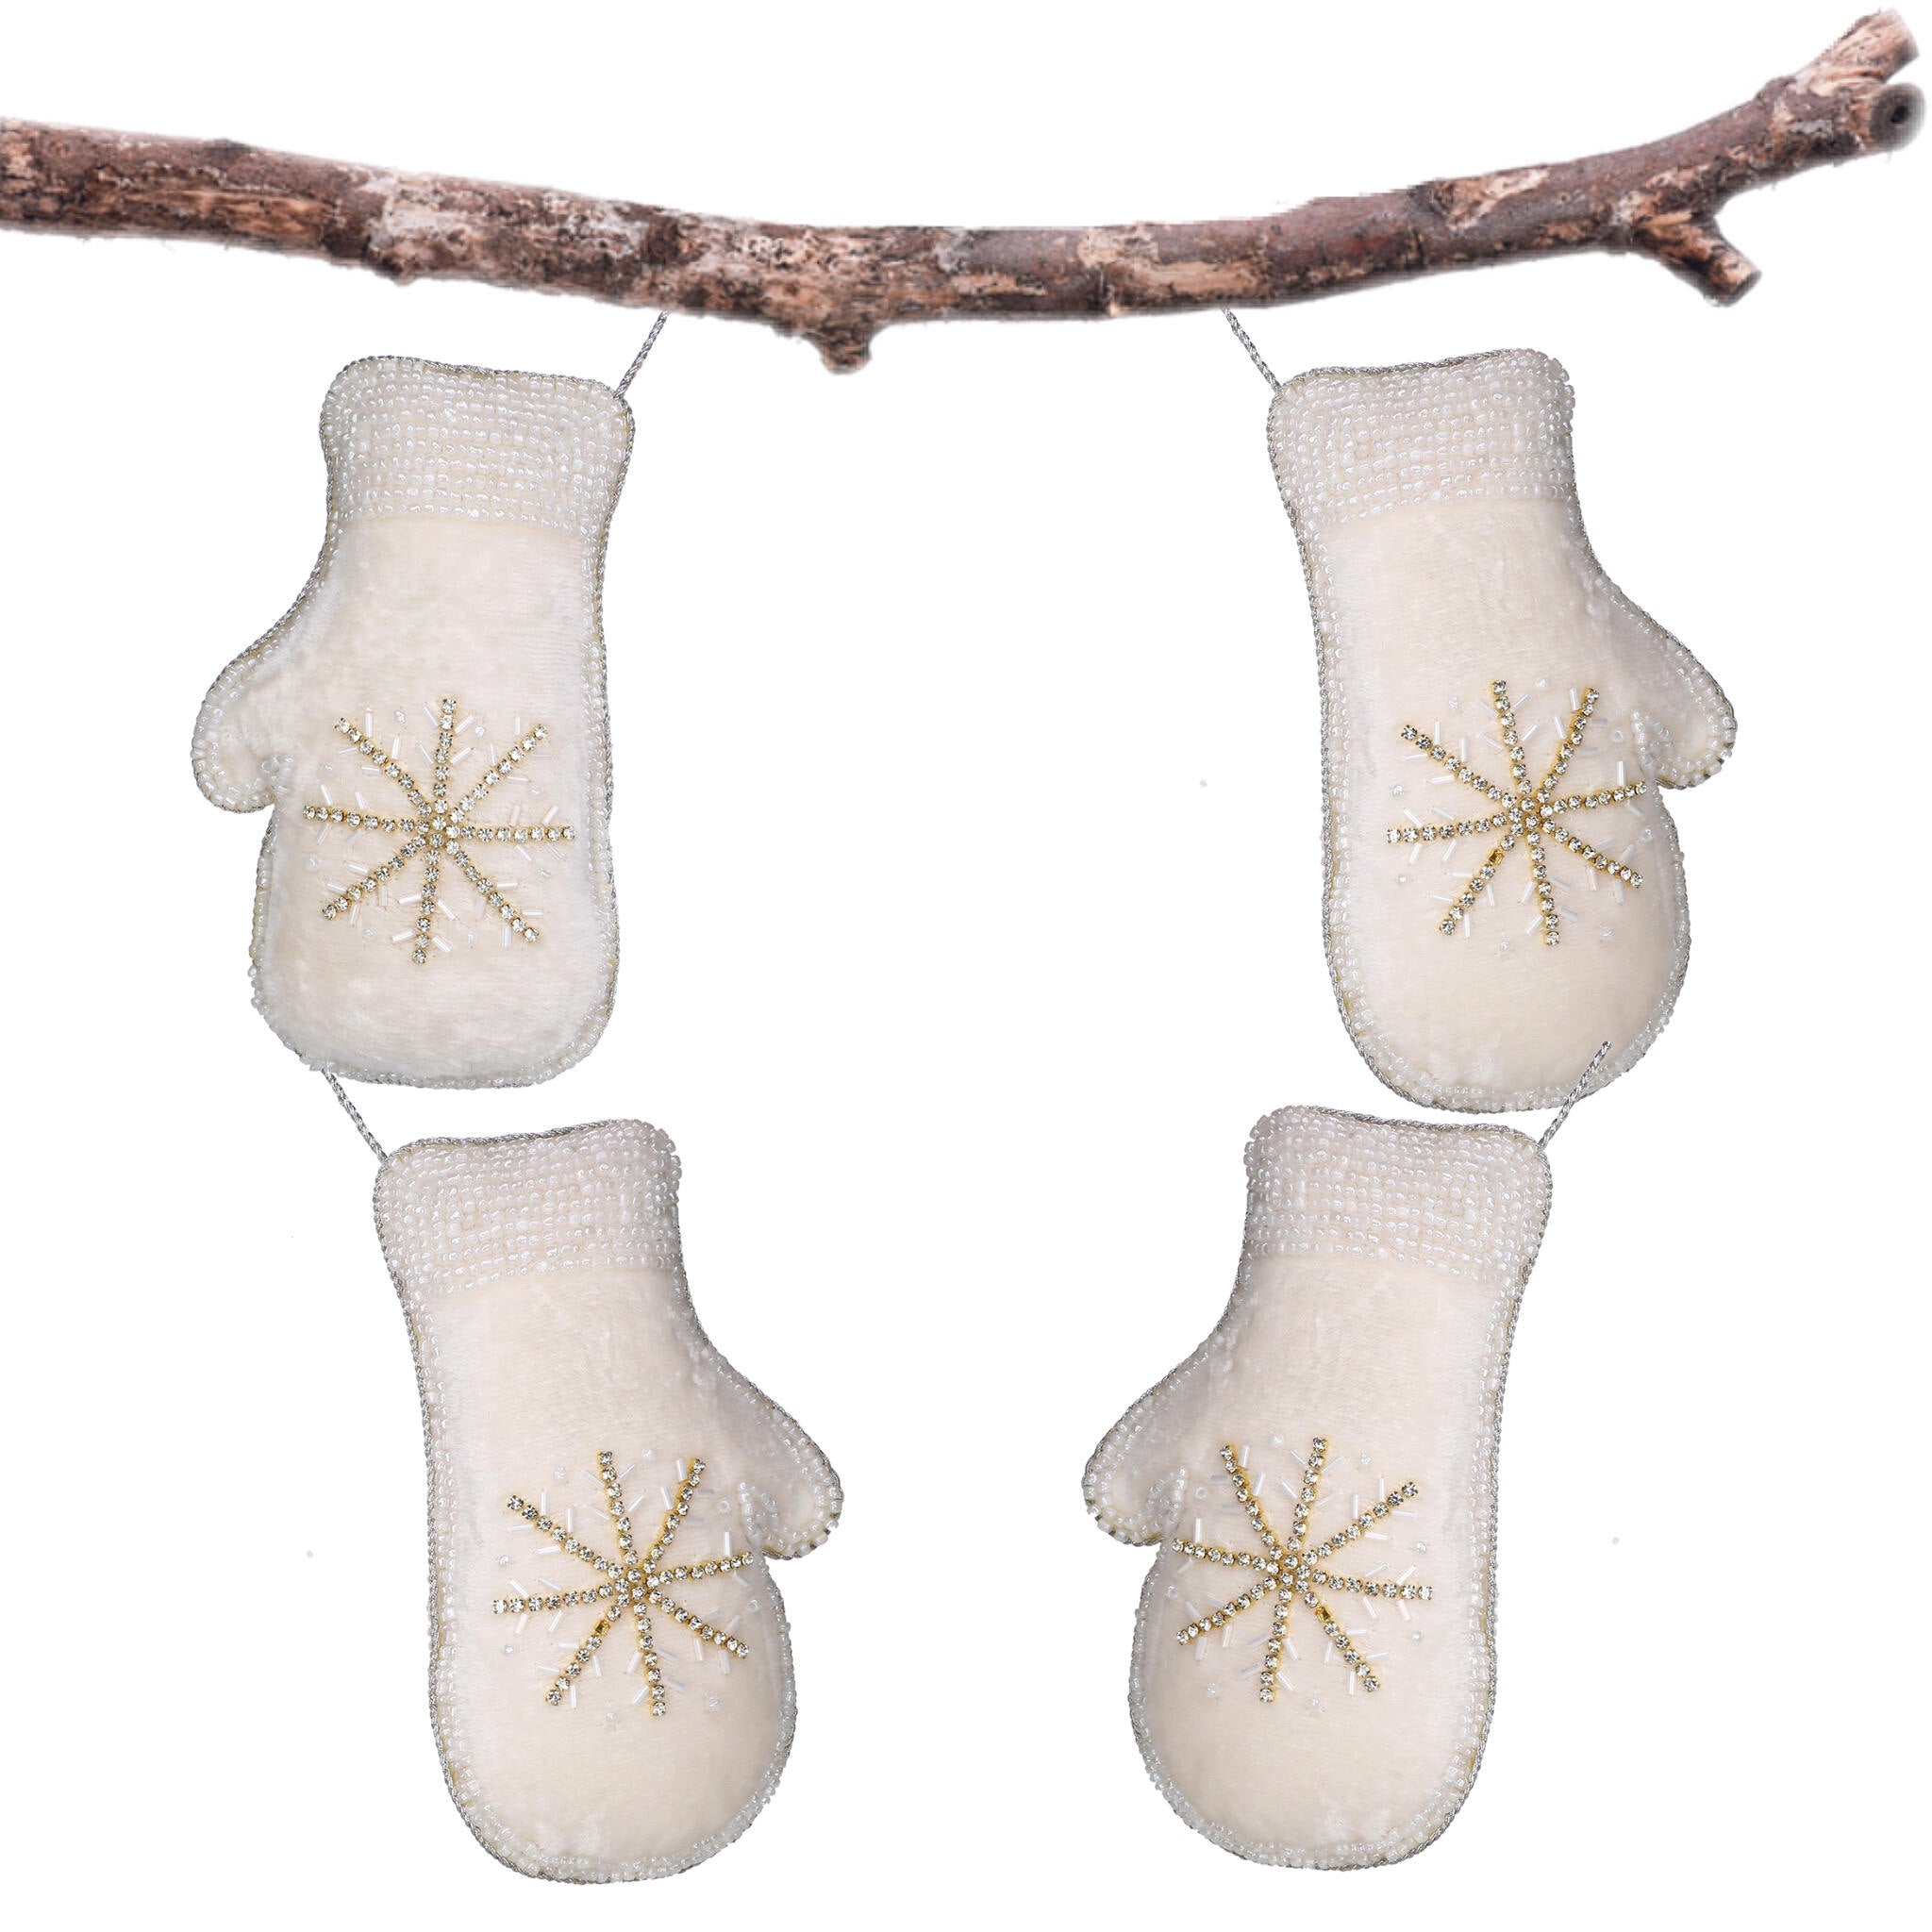 Sugar & Spice Bead Embroidered Plush Hanging in White & Gold, Set of 2